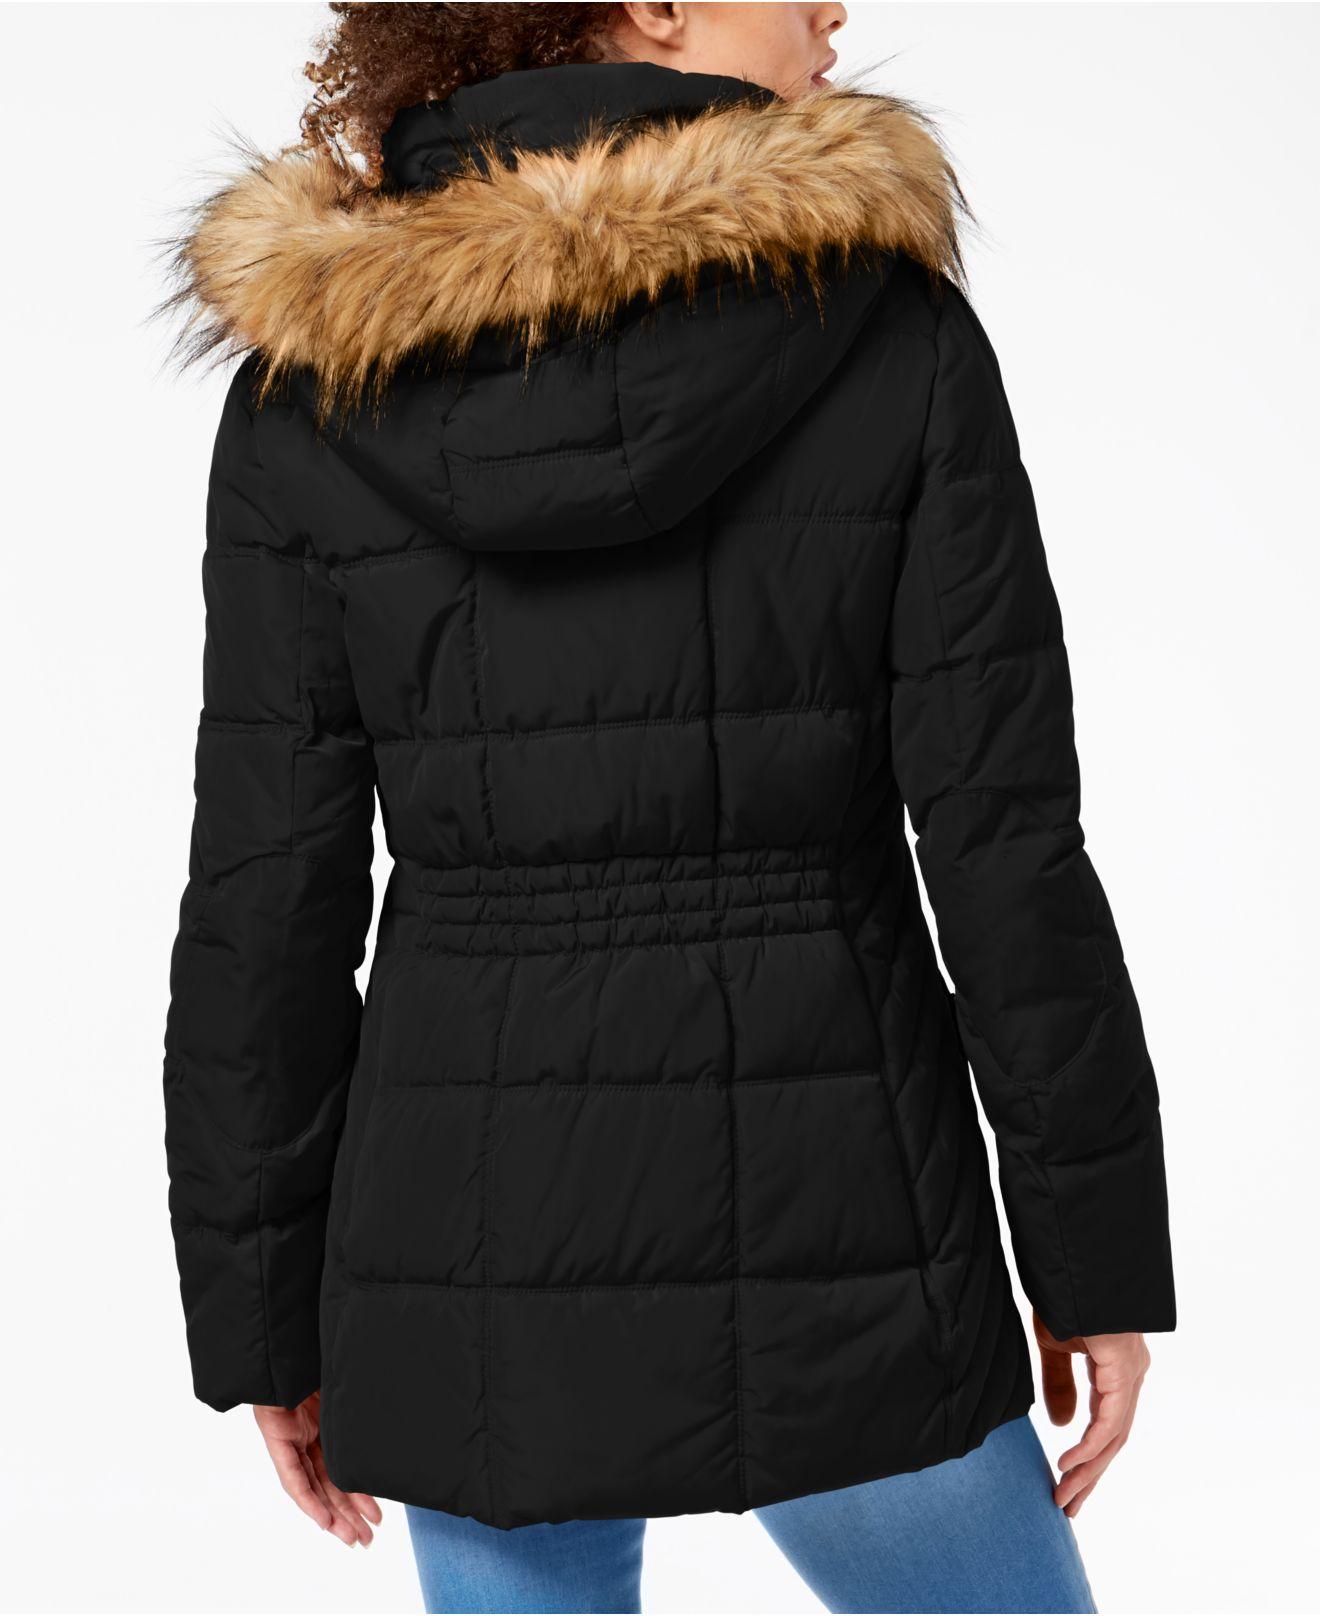 Tommy Hilfiger Hooded Puffer Coat With Faux Fur Trim in Black - Lyst